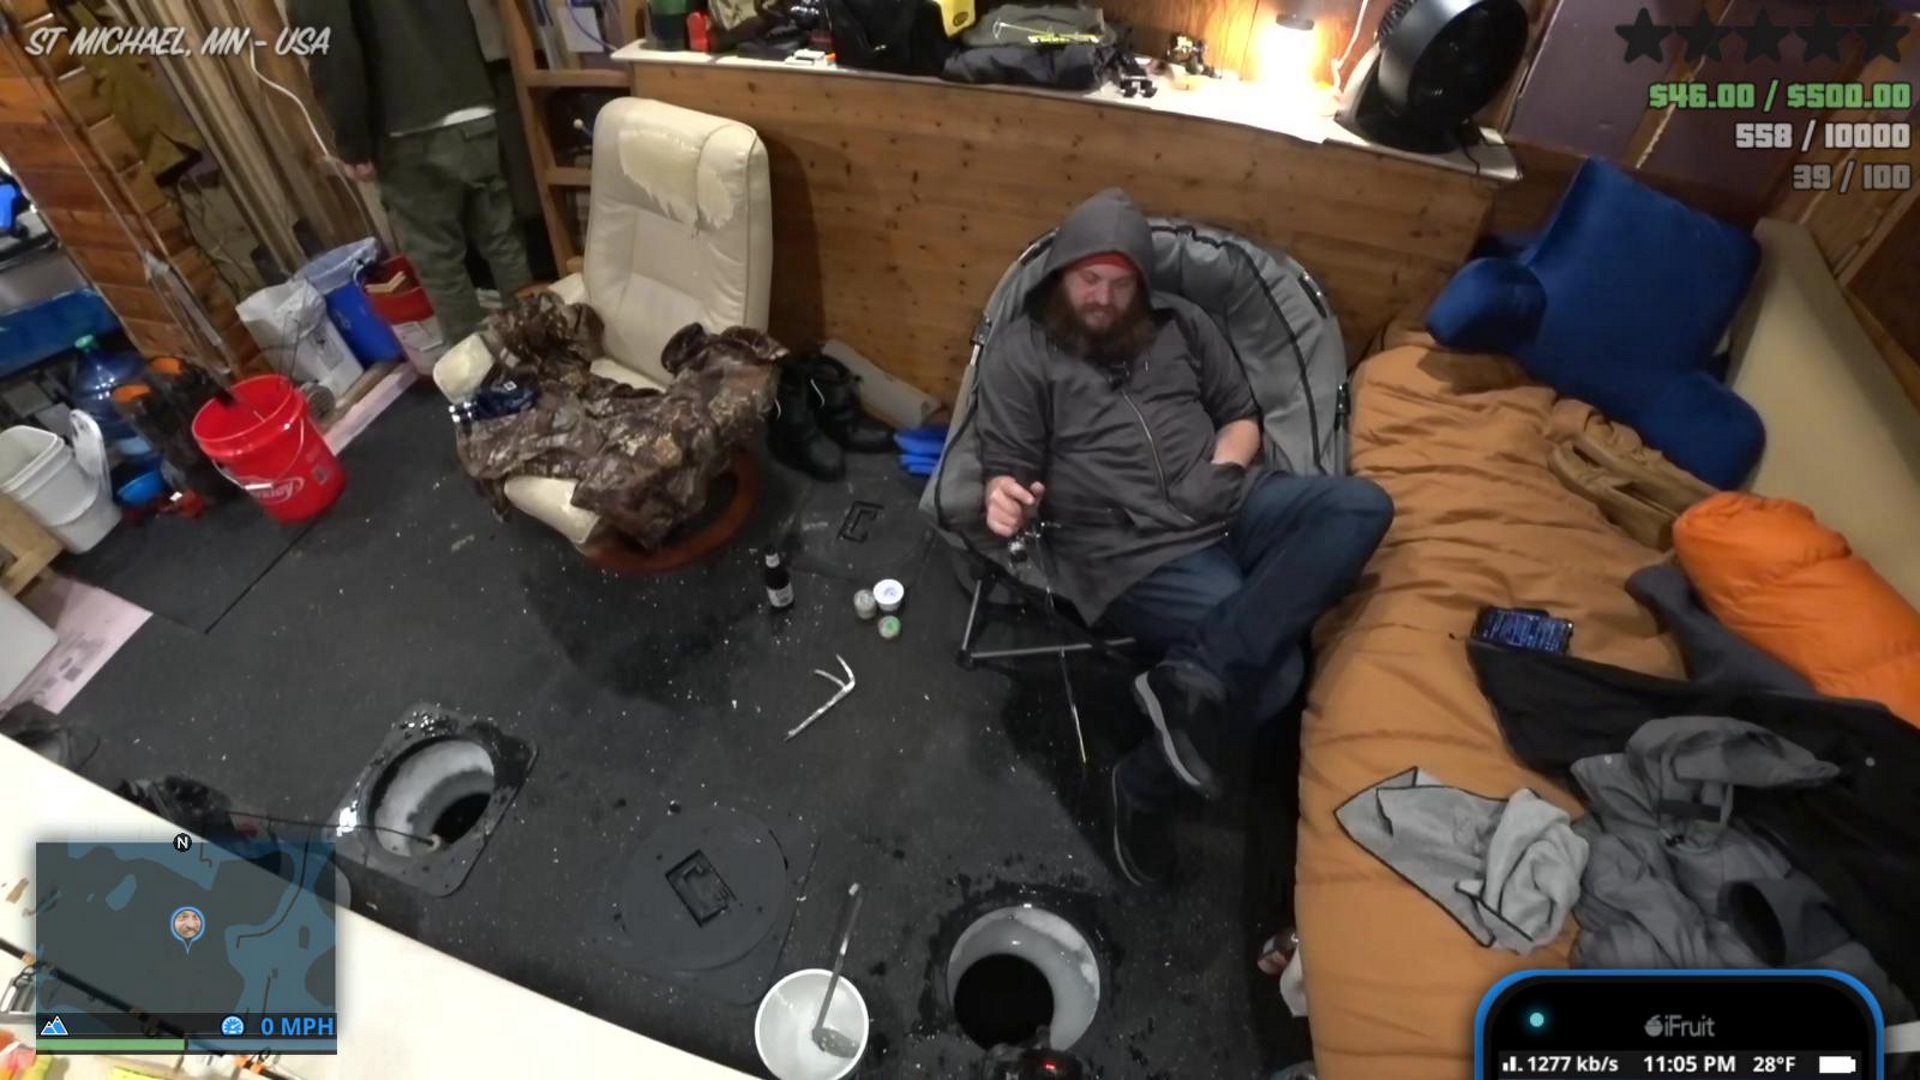 another-chill-ice-fishing-stream-just-chatting-0901-https-t-co-p3oqbxuliz-https-t-co-pbk6echko5